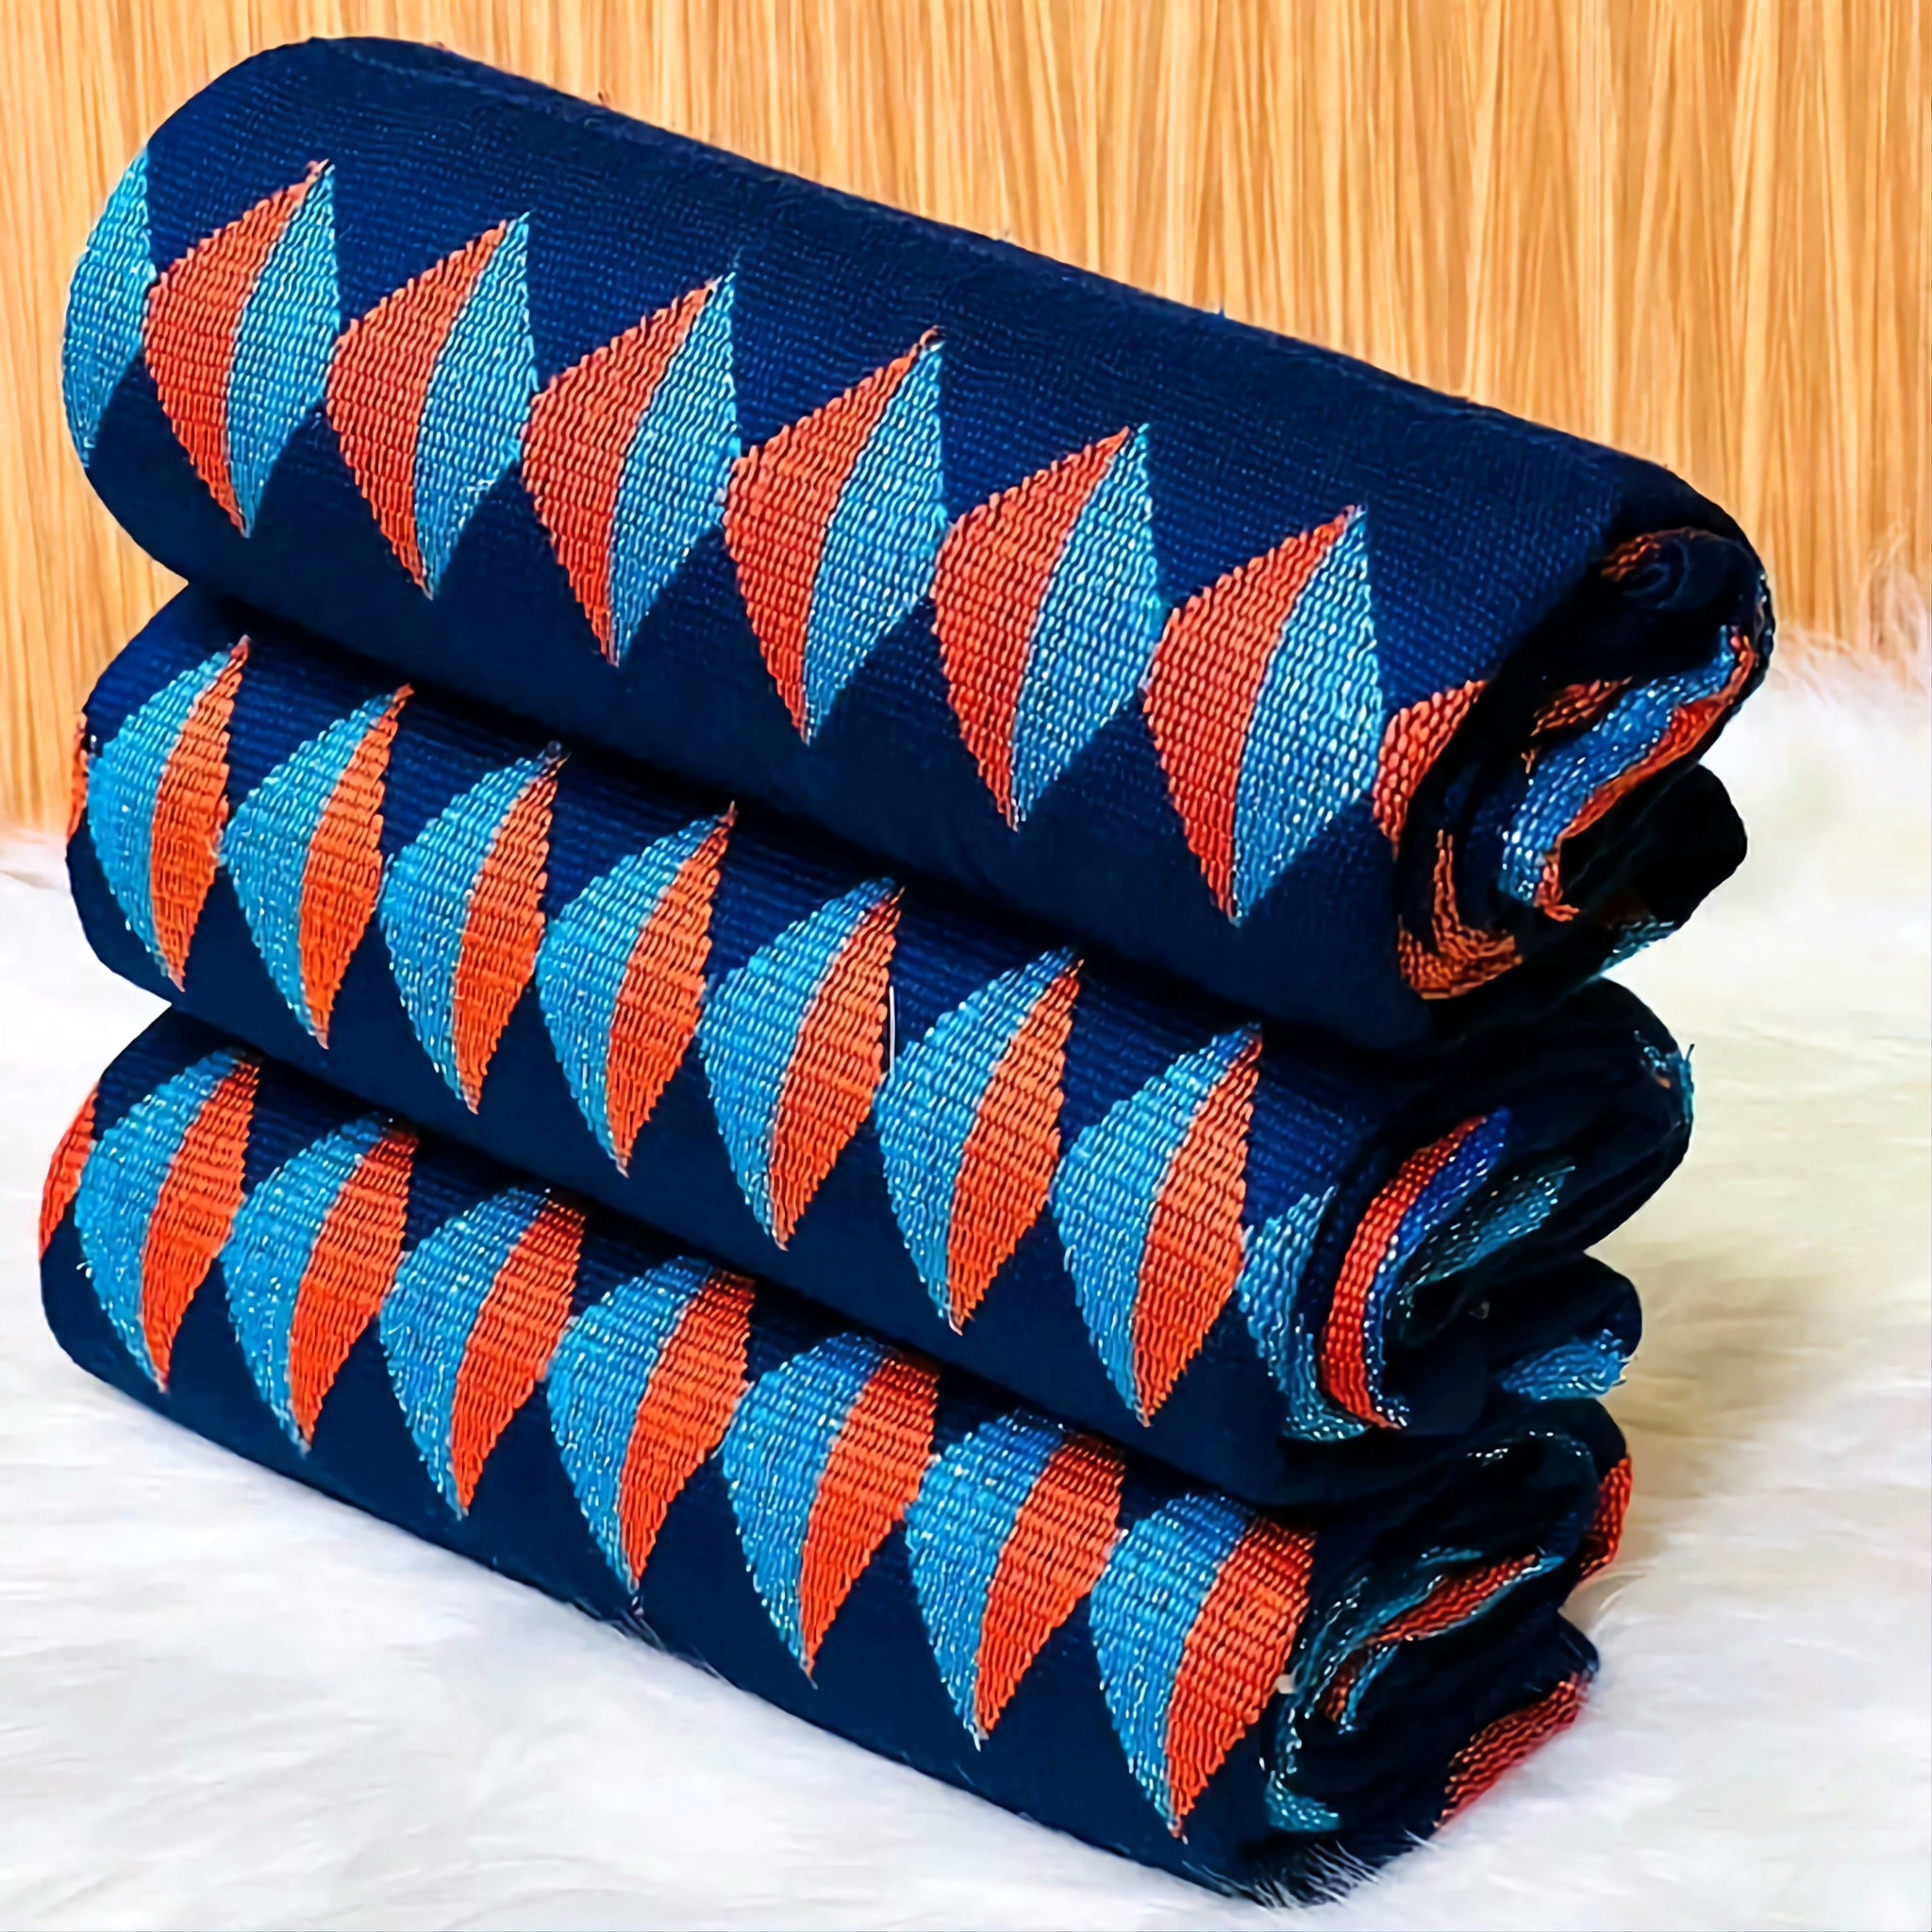 MG Authentic Hand Weaved Kente Cloth A2569